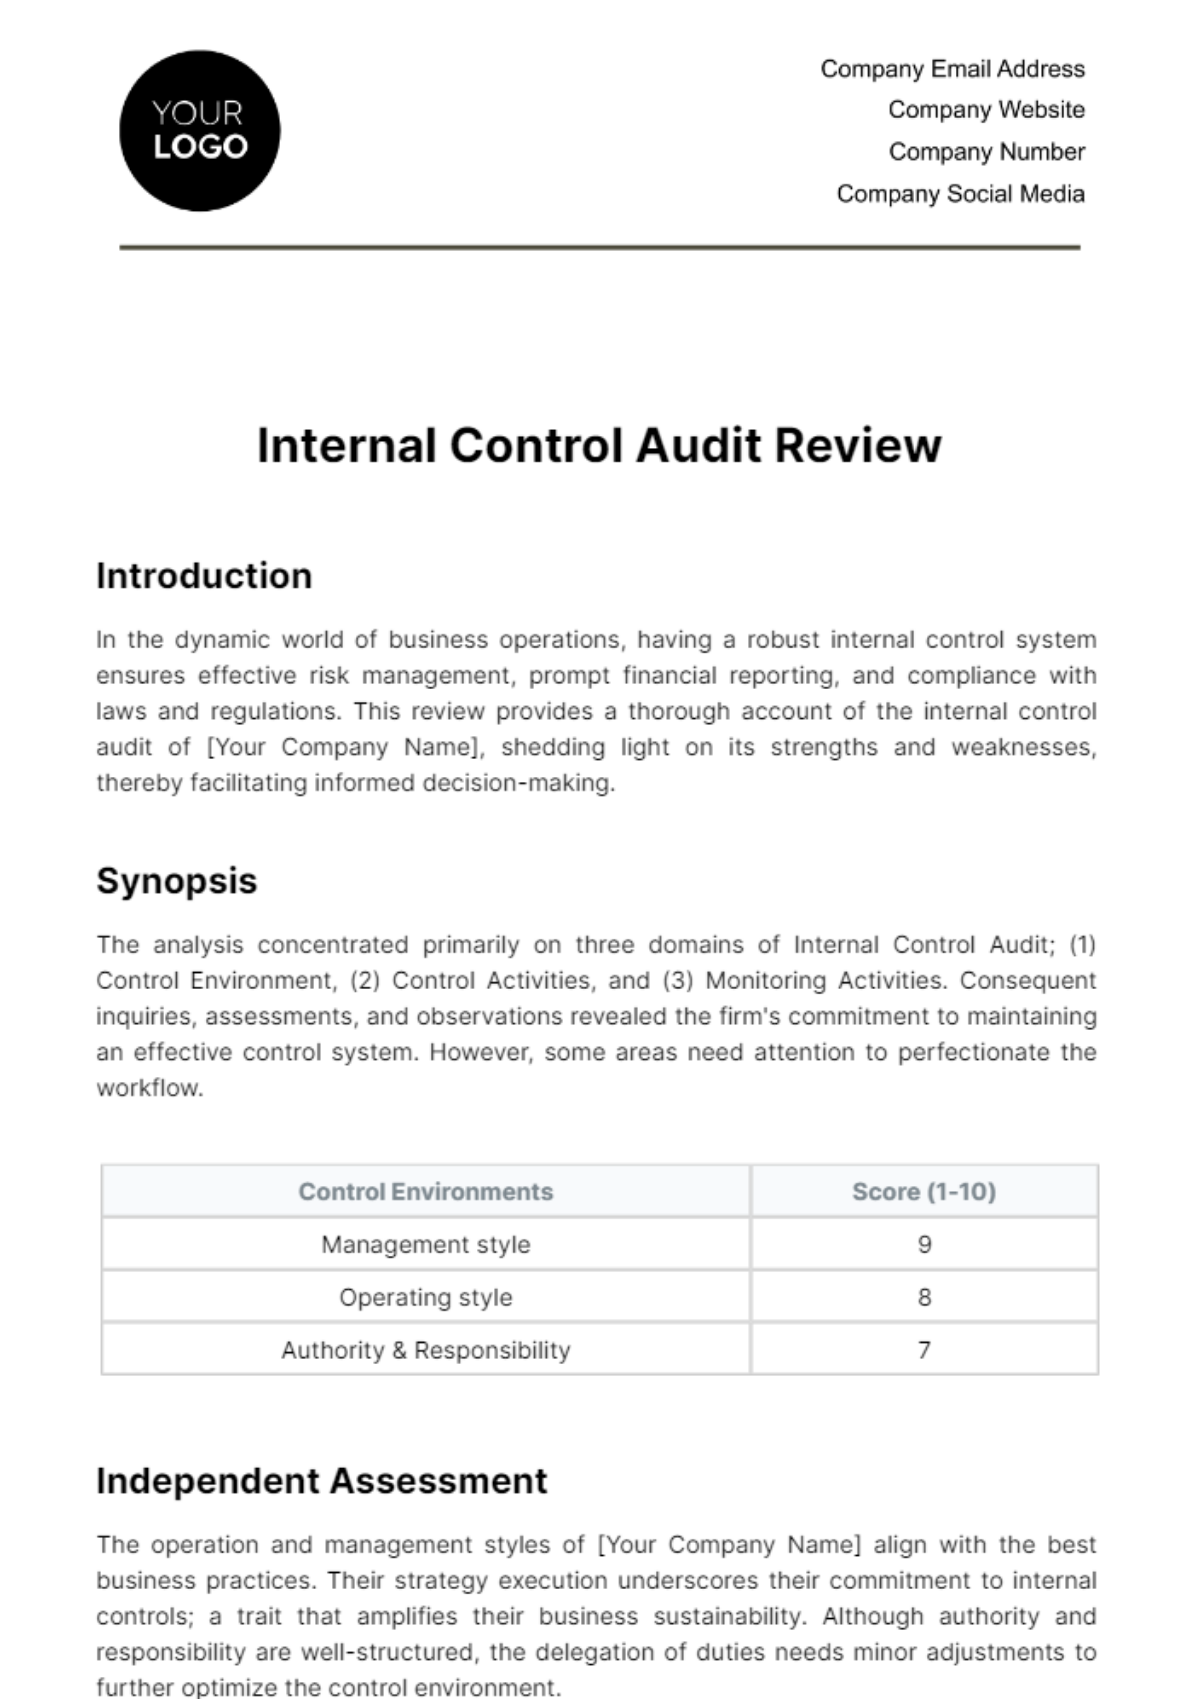 Internal Control Audit Review Template